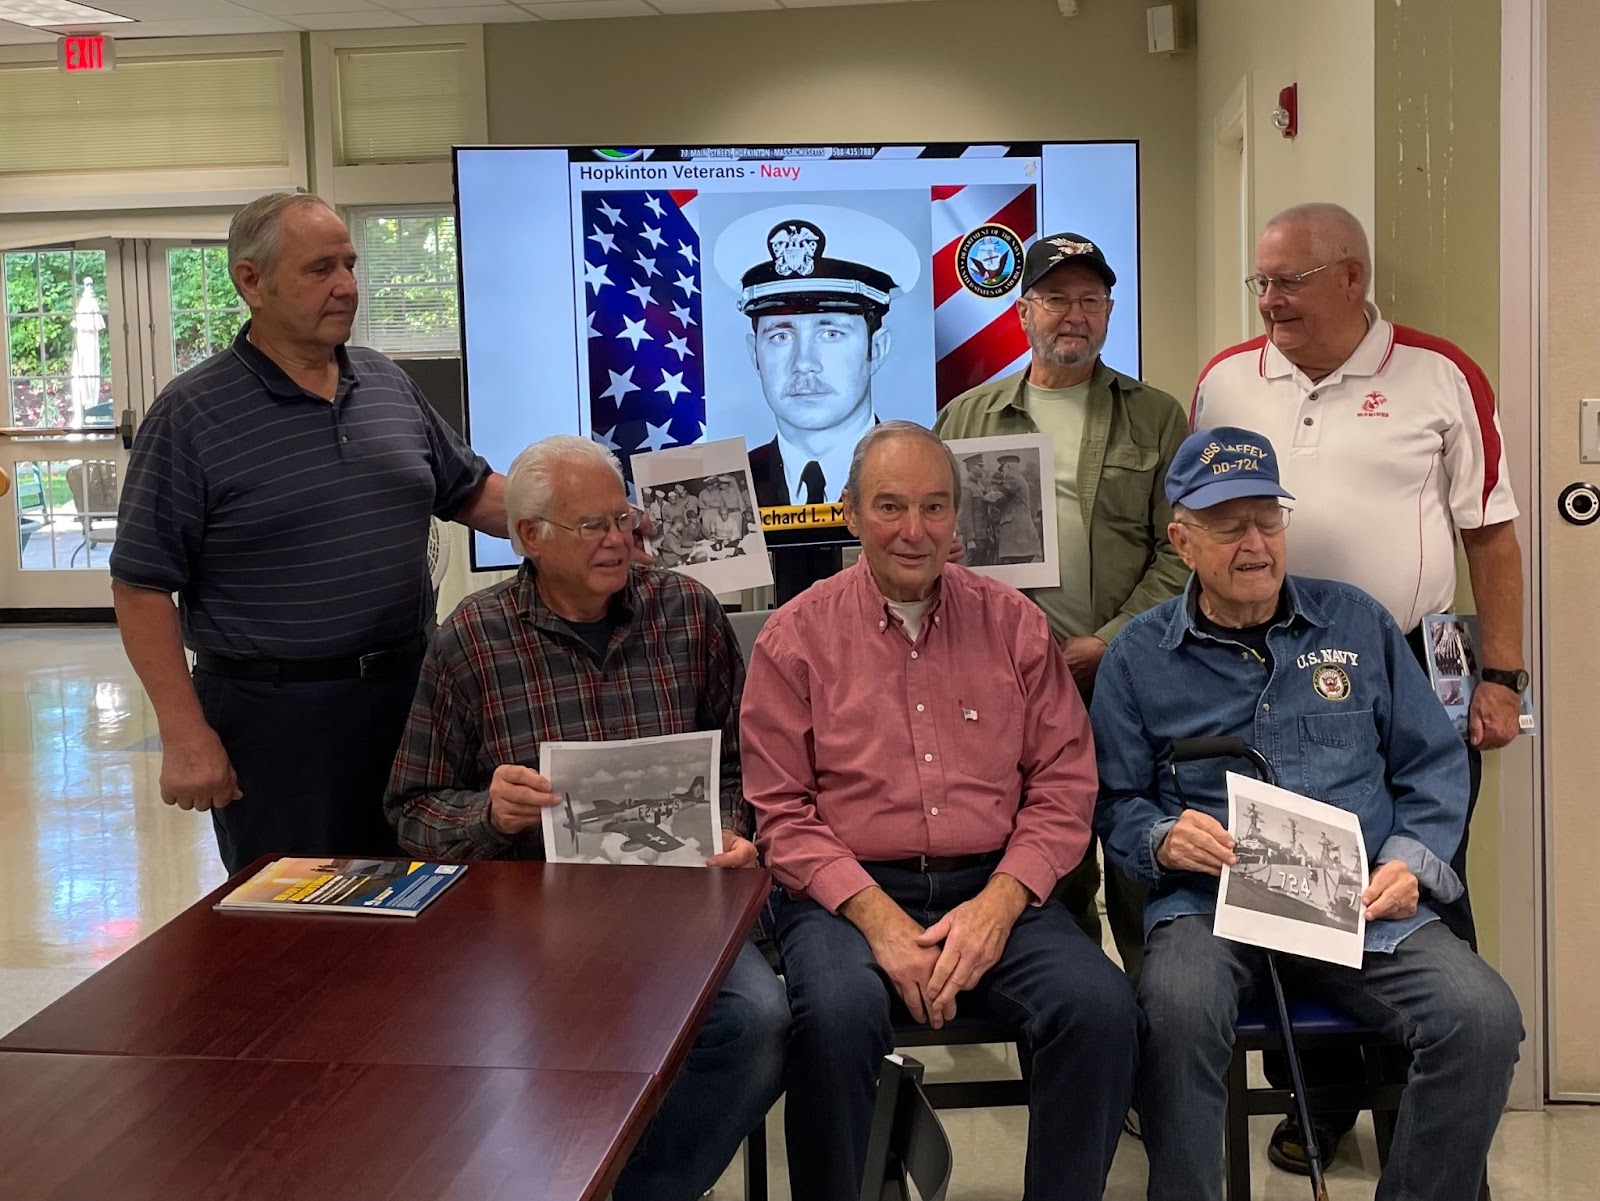 Veterans discuss military events at monthly breakfast